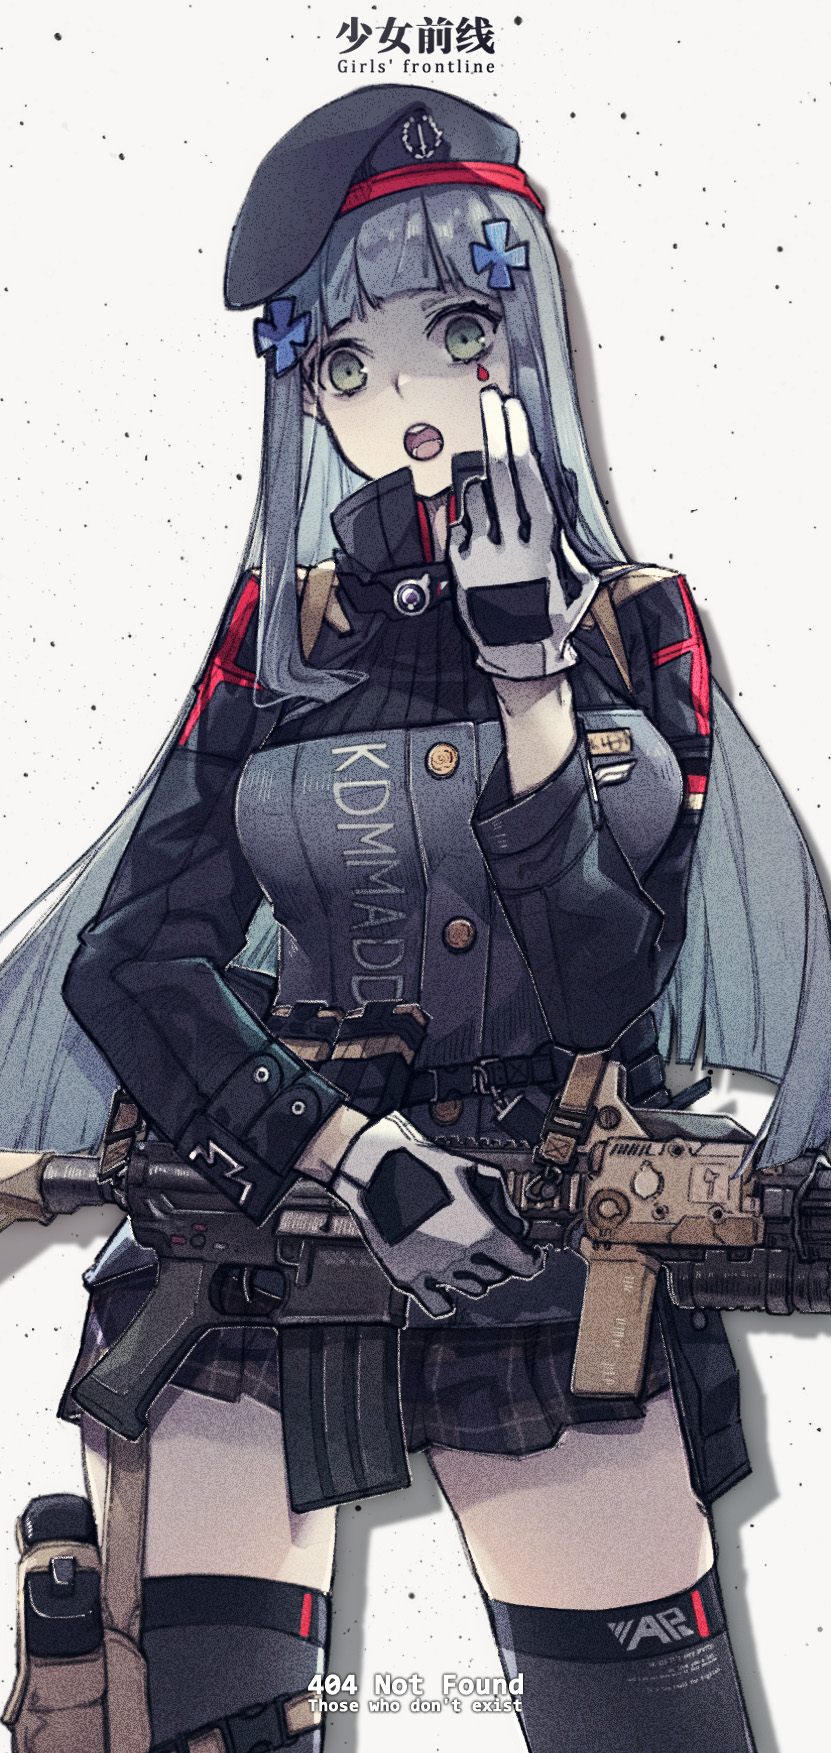 1girl 404_(girls_frontline) arm_up assault_rifle bangs beret black_headwear black_legwear blunt_bangs breasts brown_skirt collar collared_jacket copyright_name english_text facial_mark girls_frontline gloves green_eyes grey_background gun h&amp;k_hk416 hair_ornament handgun hat highres hk416_(girls_frontline) holding holding_gun holding_weapon holstered_weapon jacket long_hair long_sleeves looking_at_viewer military military_jacket open_mouth pistol plaid plaid_skirt rifle scope silver_hair simple_background skirt solo teardrop thigh-highs weapon white_gloves zxzx121222